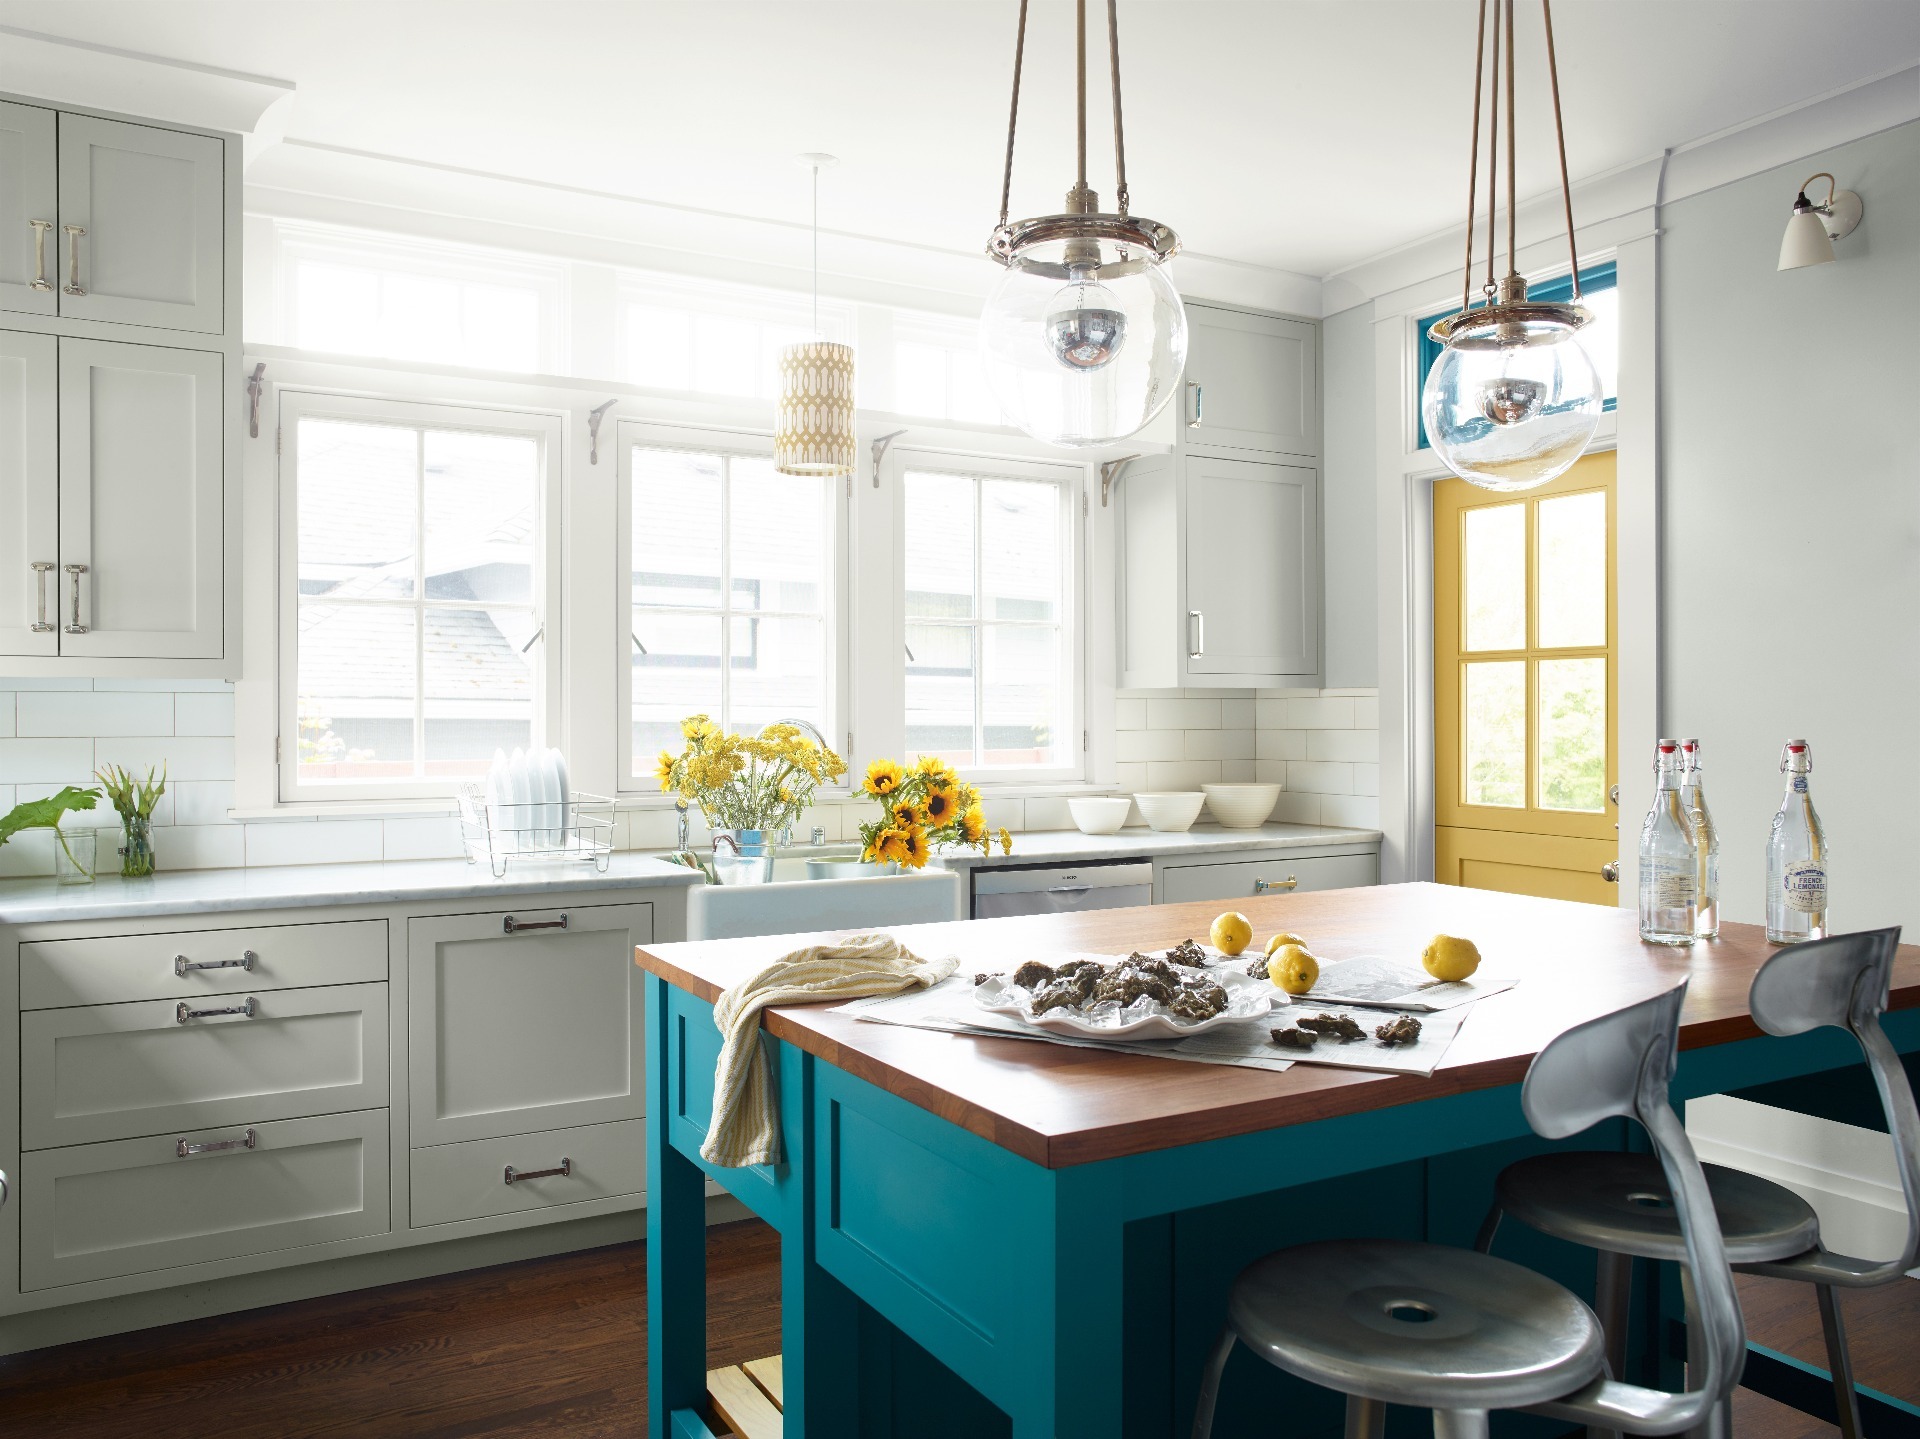 Benjamin Moore's Advance Satin Gloss used to paint kitchen cabinets.